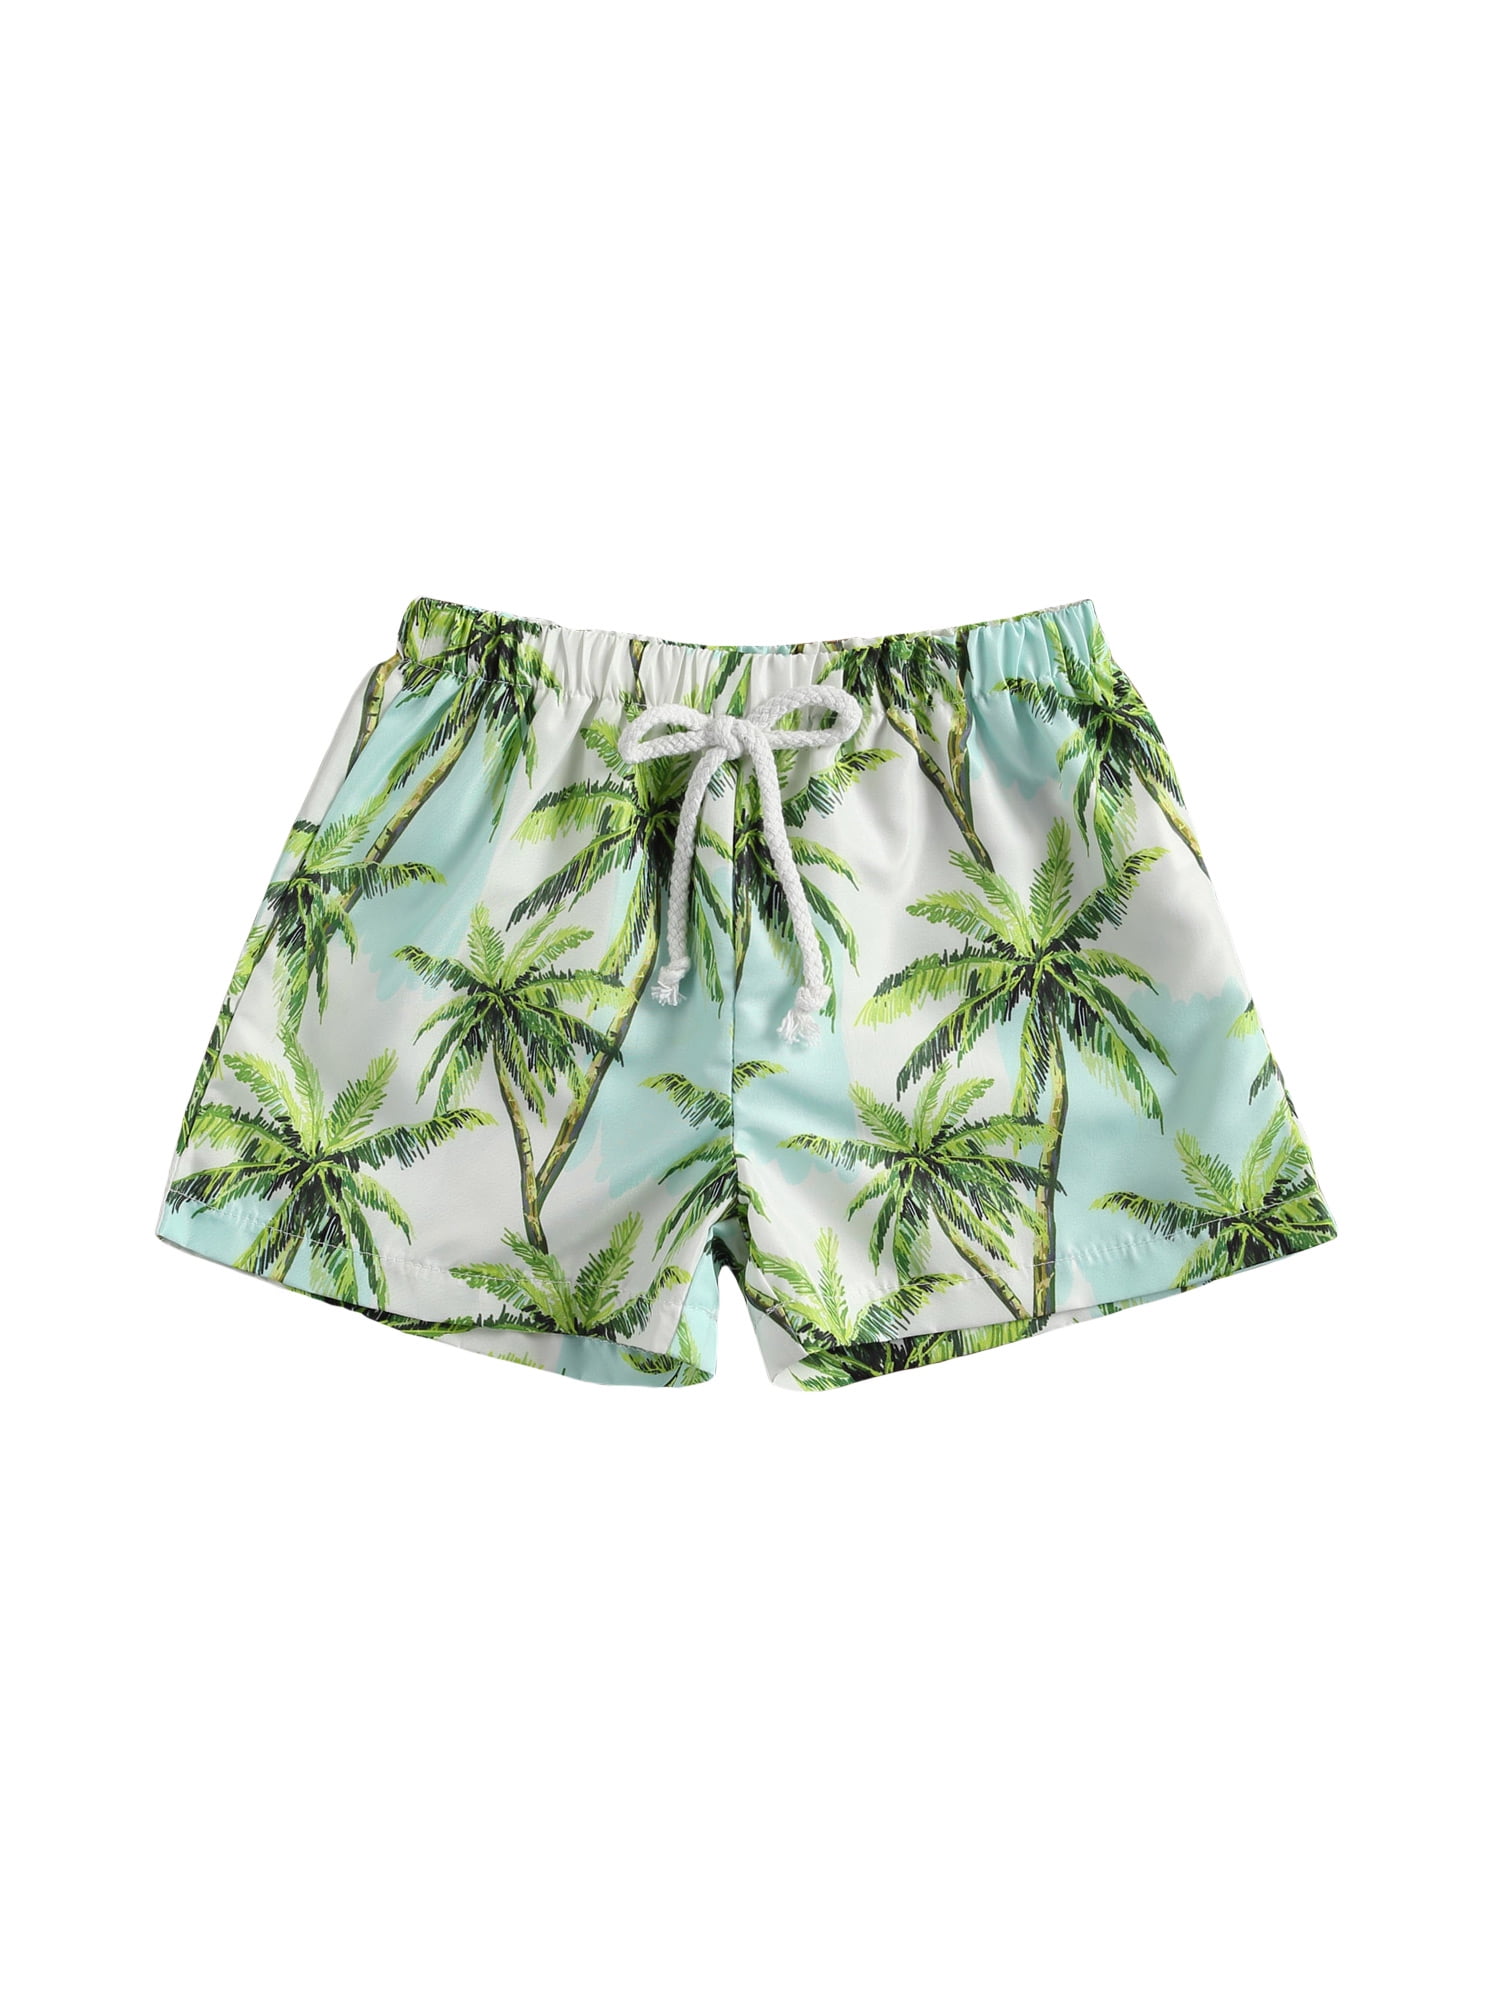 Rip Curl Little Boy's Good Vibes Volley Mesh Lined Swim Trunks Shorts 5/6 